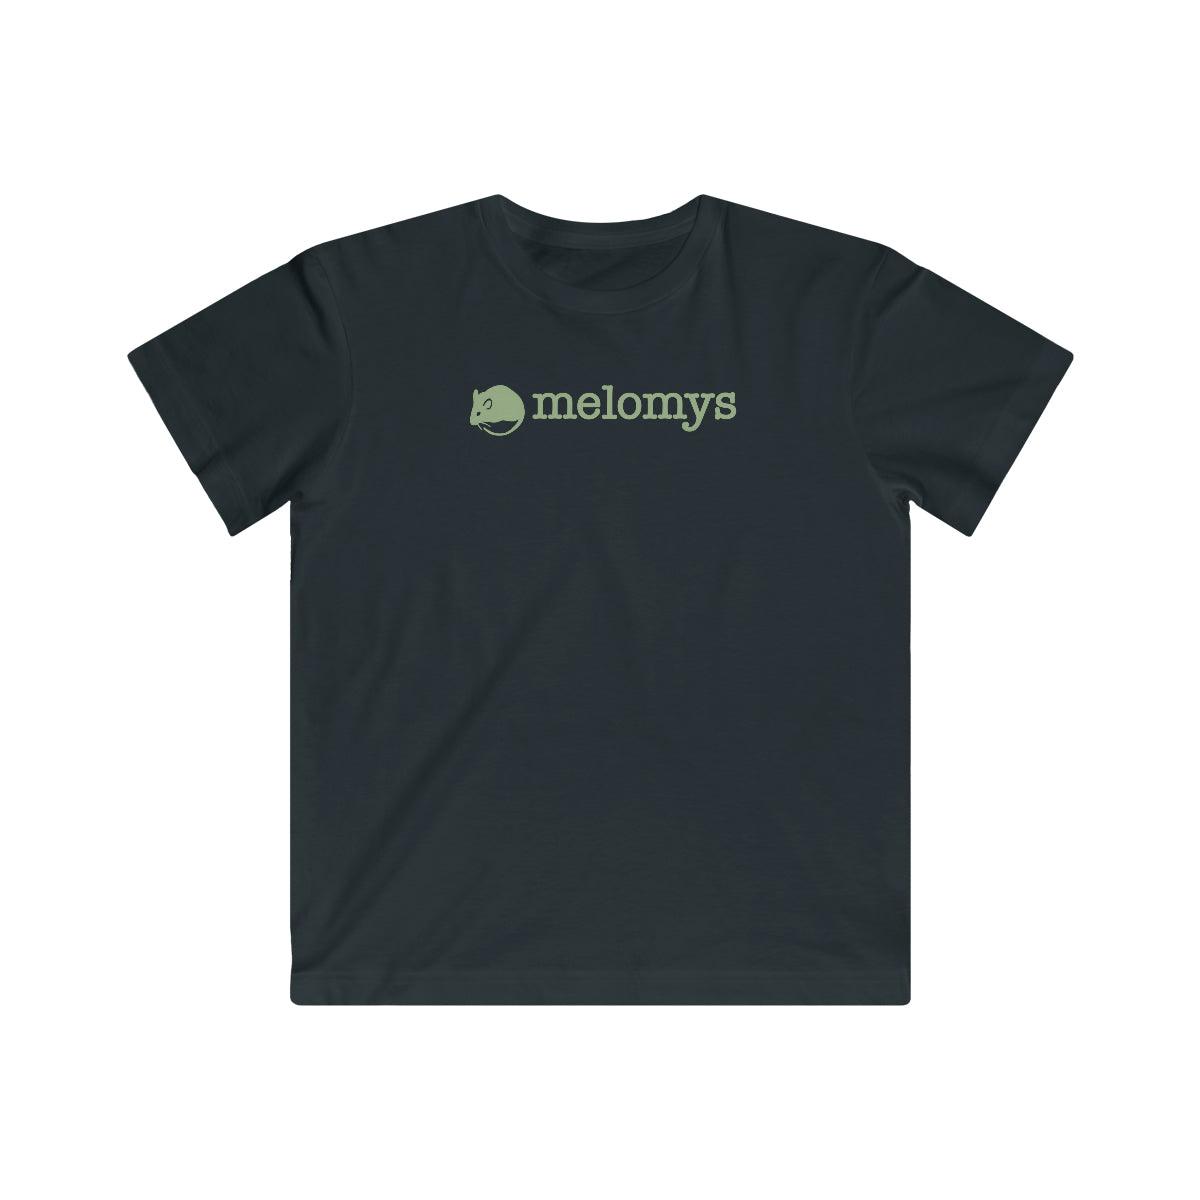 Melomys Kids 100% Cotton Jersey T-Shirt - Melomys